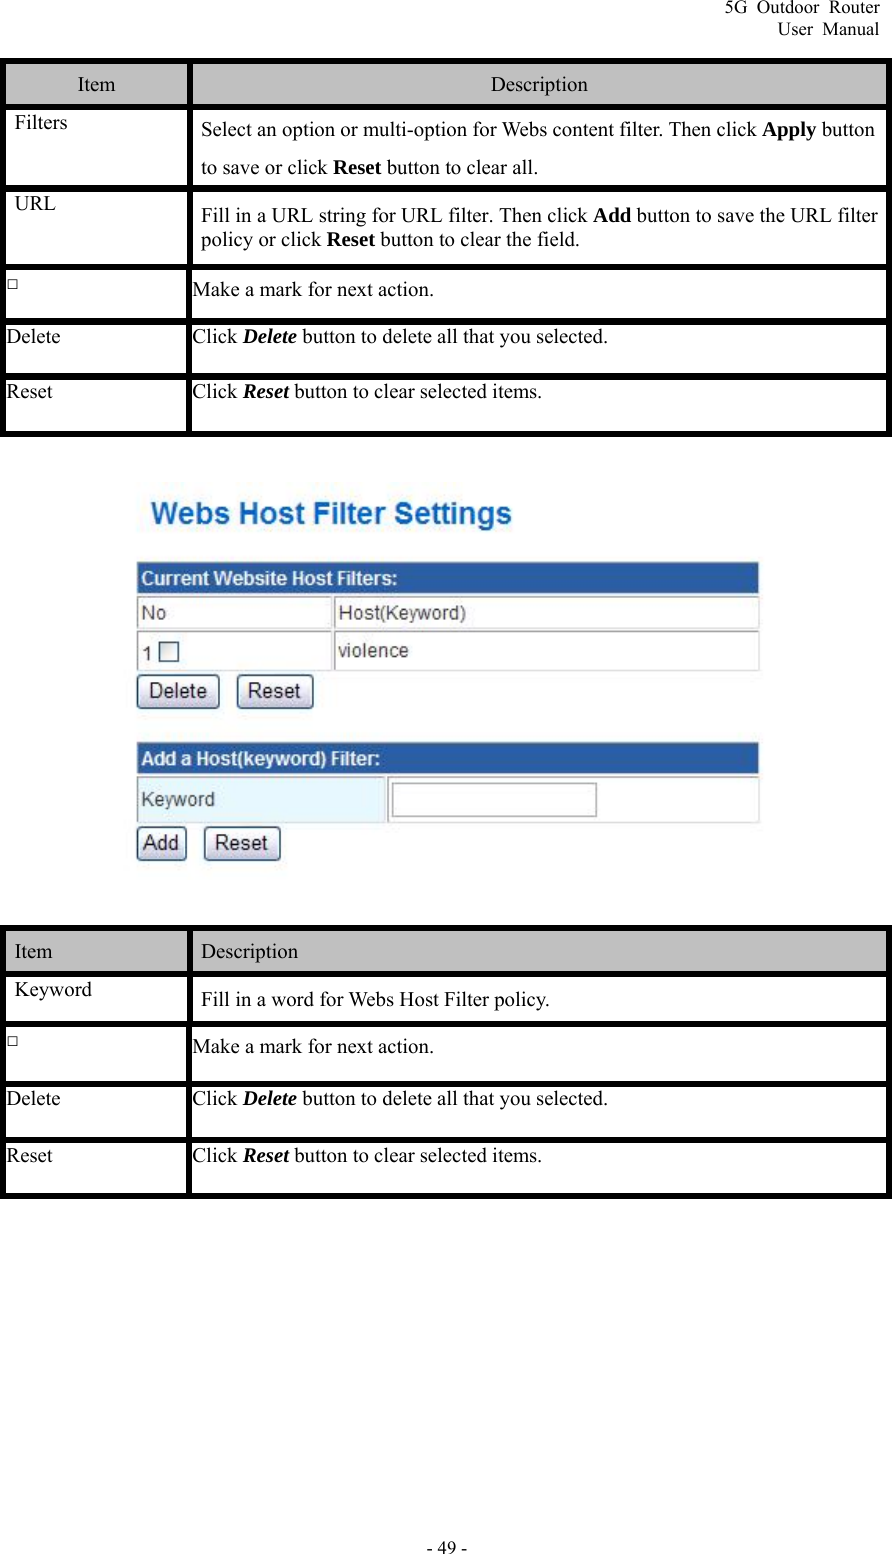 5G Outdoor Router User Manual - 49 - Item  Description Filters  Select an option or multi-option for Webs content filter. Then click Apply button to save or click Reset button to clear all. URL  Fill in a URL string for URL filter. Then click Add button to save the URL filter policy or click Reset button to clear the field. □ Make a mark for next action. Delete Click Delete button to delete all that you selected. Reset Click Reset button to clear selected items.    Item   Description  Keyword  Fill in a word for Webs Host Filter policy. □ Make a mark for next action. Delete Click Delete button to delete all that you selected. Reset Click Reset button to clear selected items.  